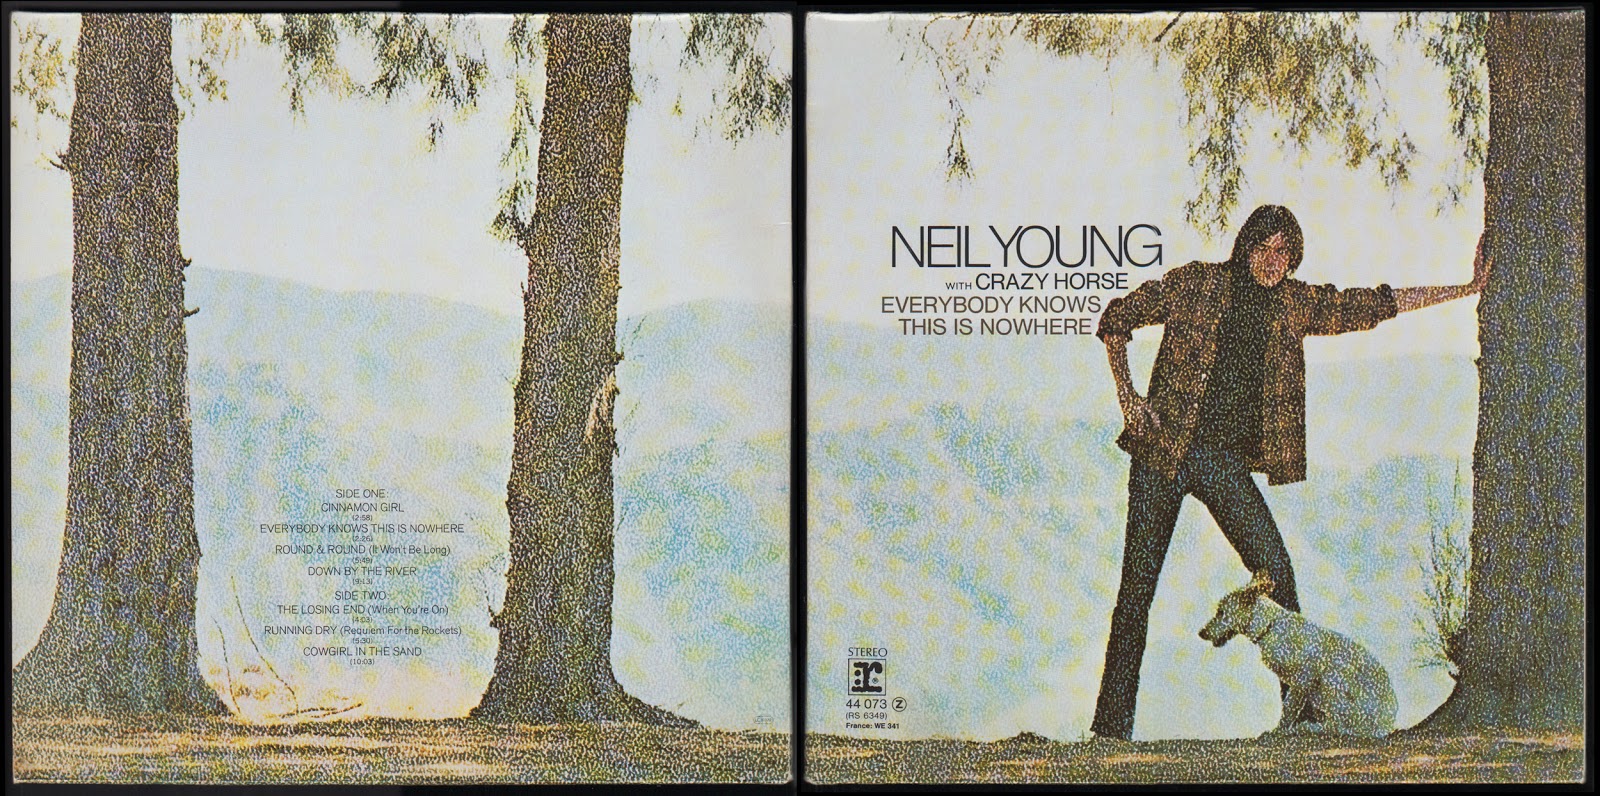 Longing for down. Neil young 1969. Neil young 1969 Everybody knows this is Nowhere. Neil young with Crazy Horse Everybody knows this is Nowhere. Neil young Crazy Horse.